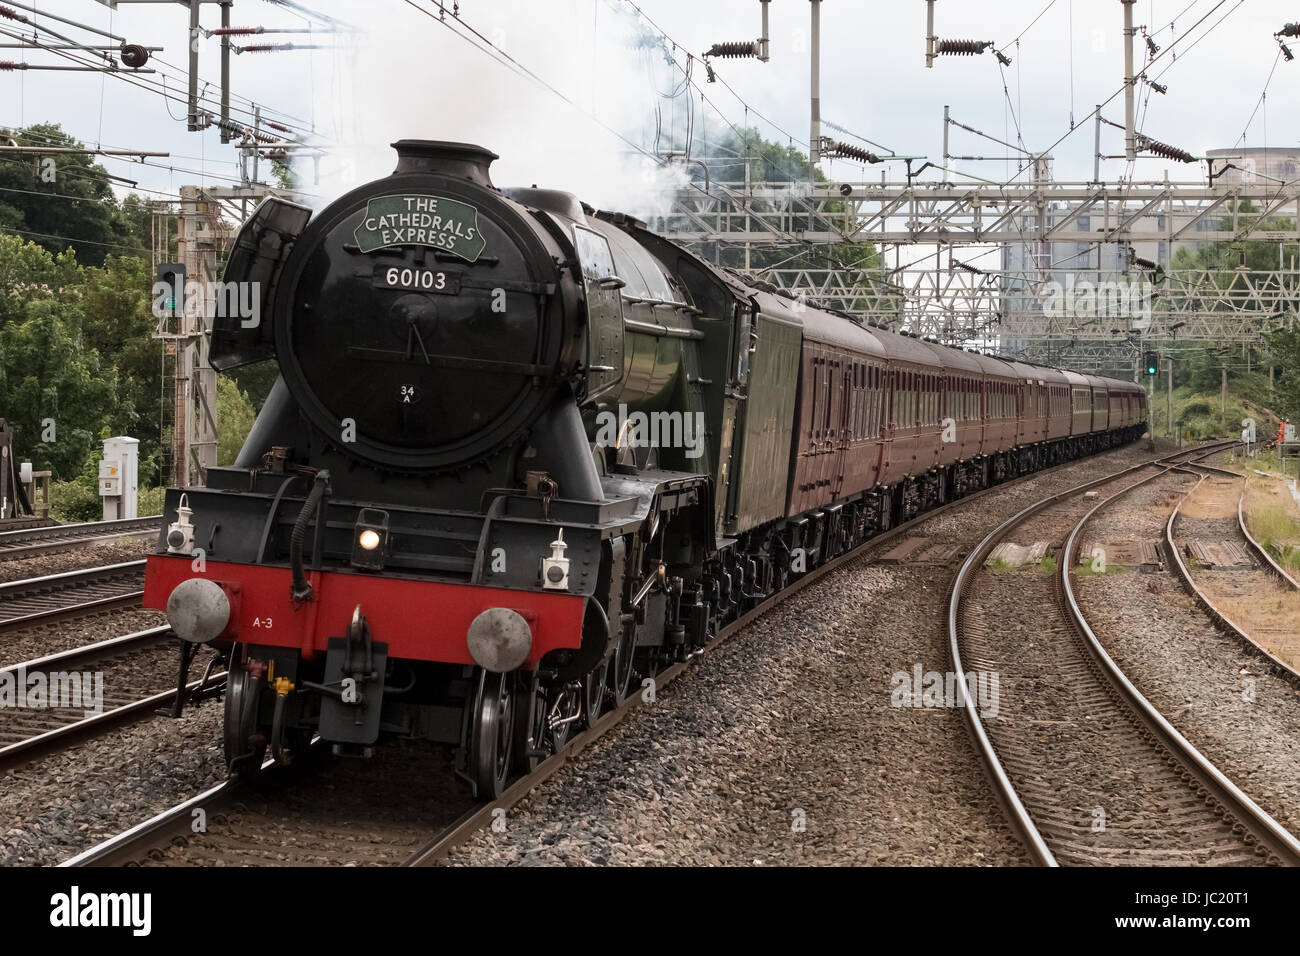 Rugeley, Staffordshire, UK. 13th Jun, 2017. Preserved British Rail A3 Pacific steam locomotive "Flying Scotsman" passes through Rugeley Trent Valley station working the Cathedrals Express railway charter from London Victoria to Chester, on the 13th June 2017. The locomotive is generally seen as the most famous steam engine in the world, having been the first steam locomotive to officially reach 100mph. Credit: Richard Holmes/Alamy Live News Stock Photo